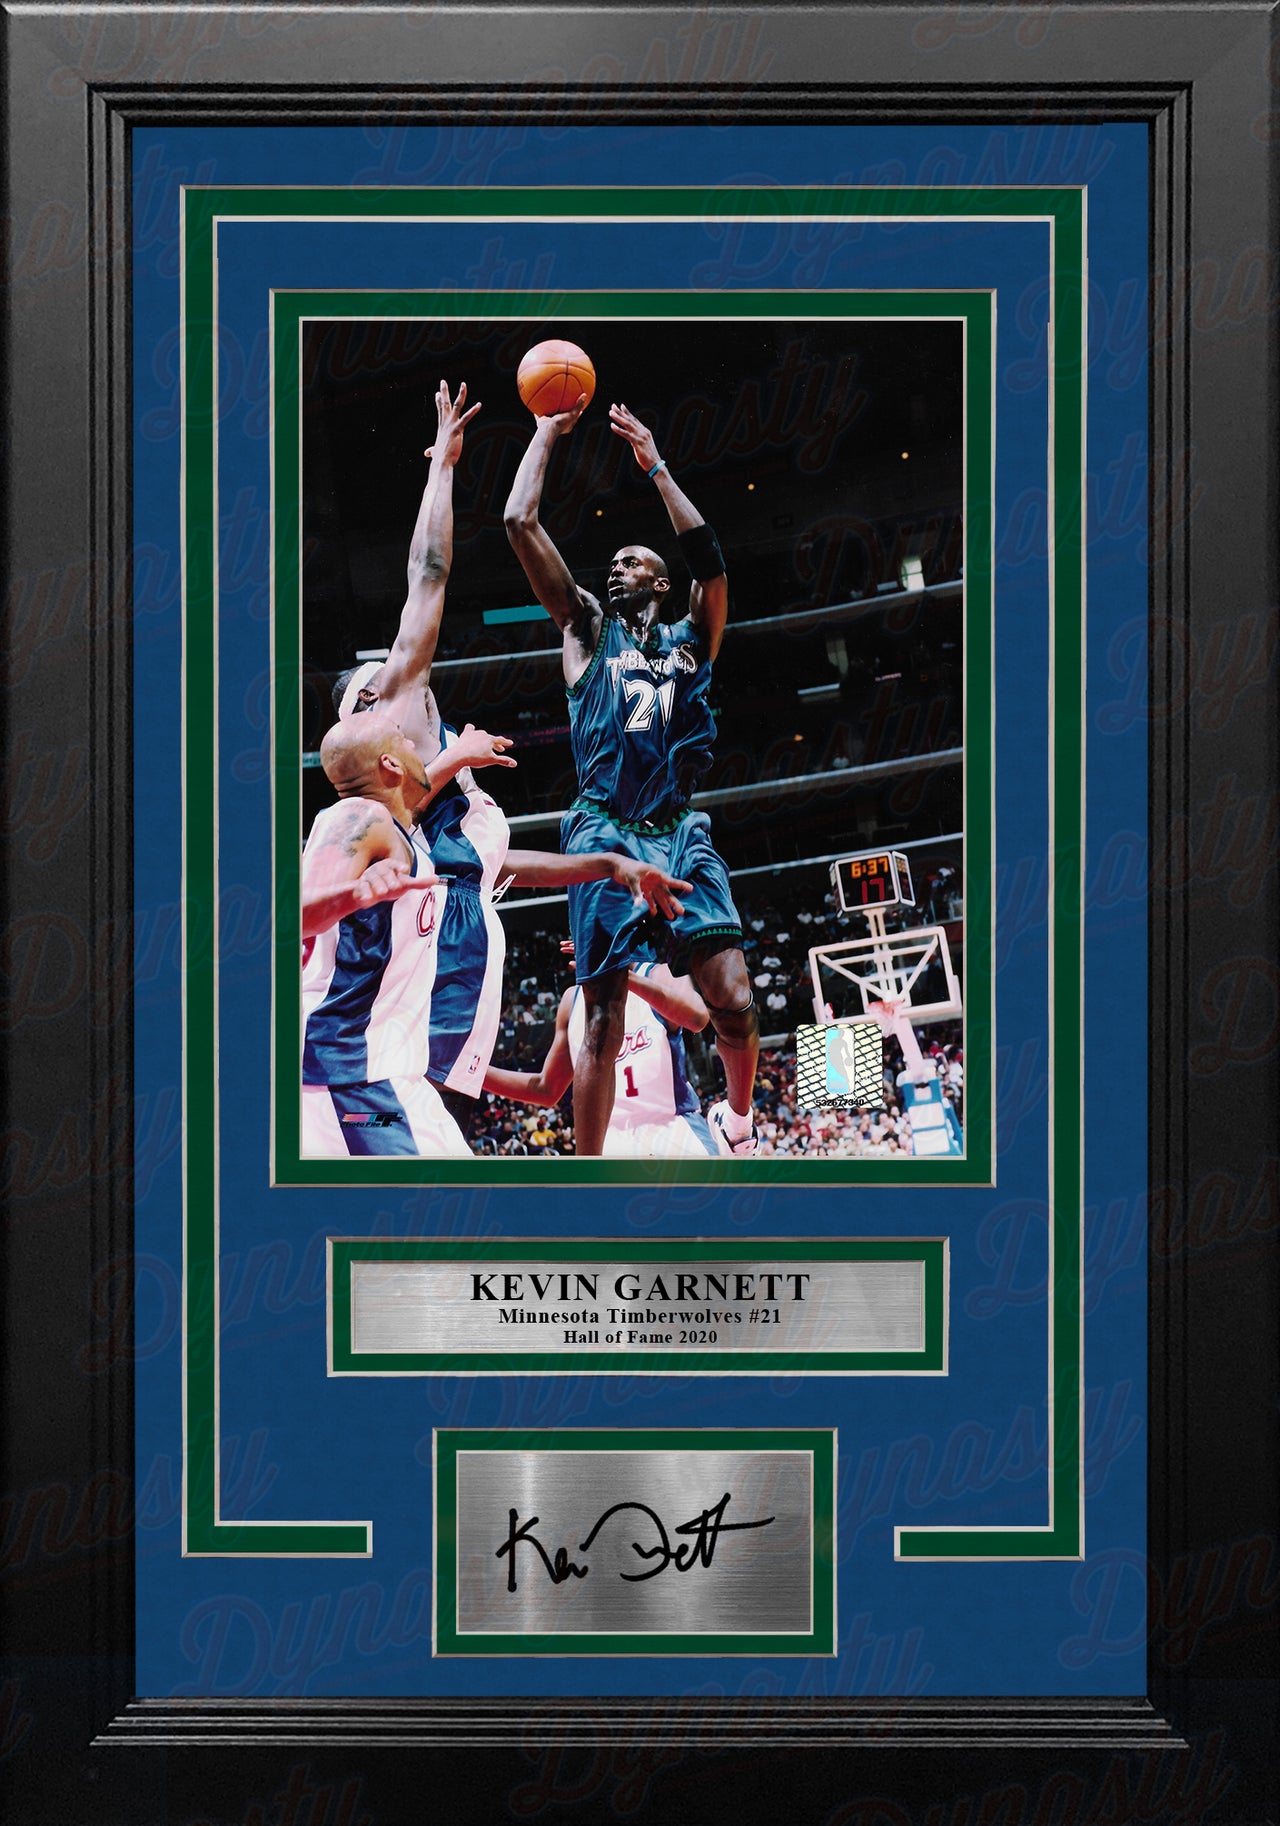 Kevin Garnett in Action Minnesota Timberwolves 8x10 Framed Basketball Photo with Engraved Autograph - Dynasty Sports & Framing 